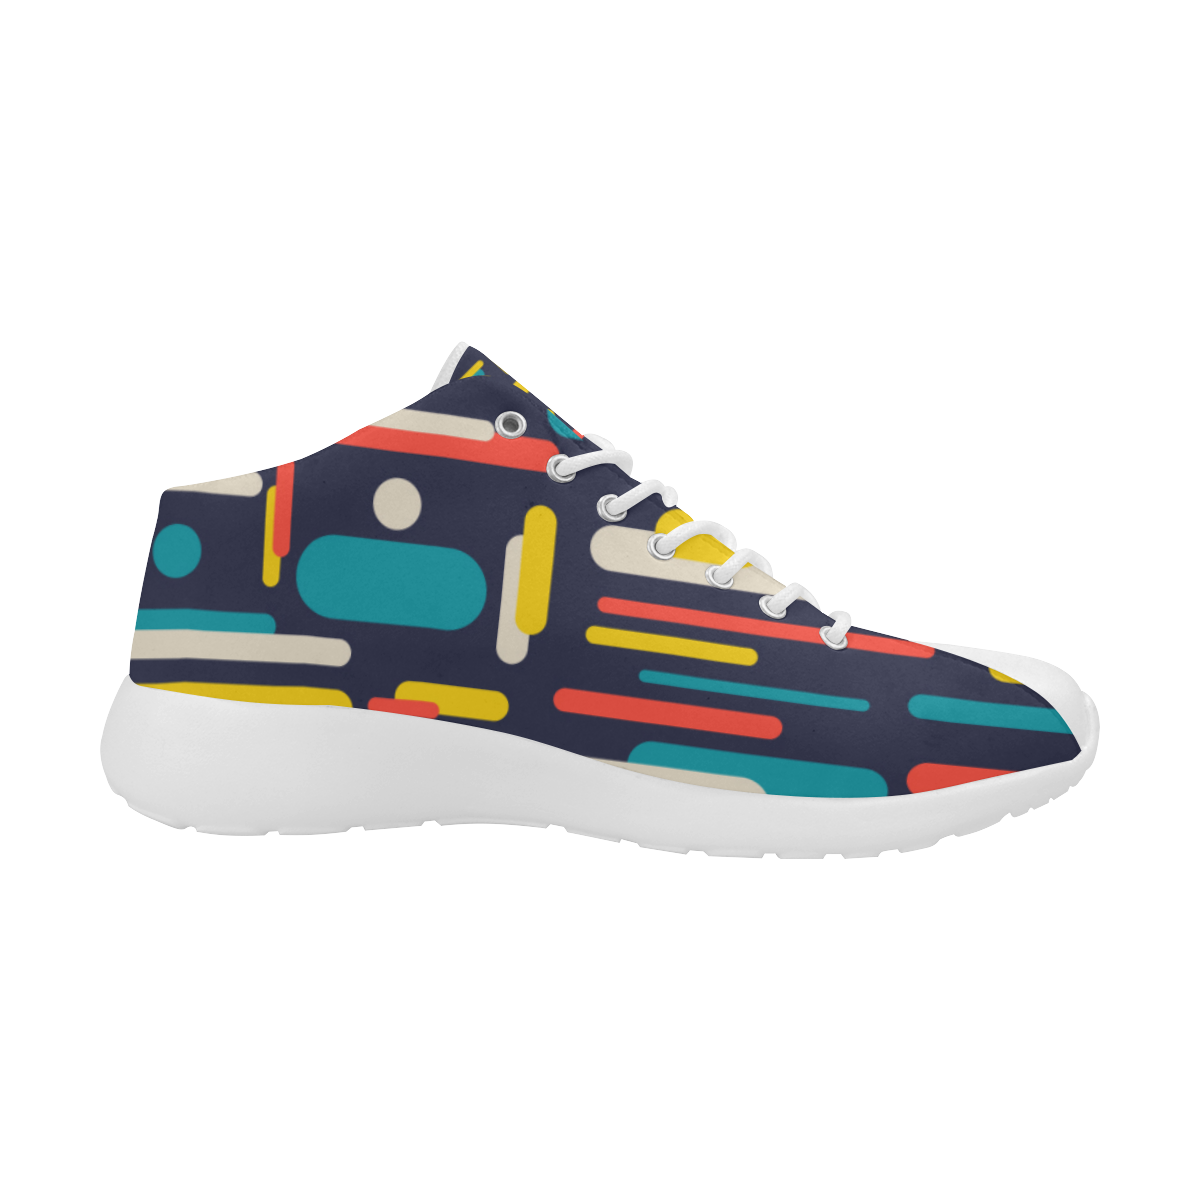 Colorful Rectangles Men's Basketball Training Shoes (Model 47502)